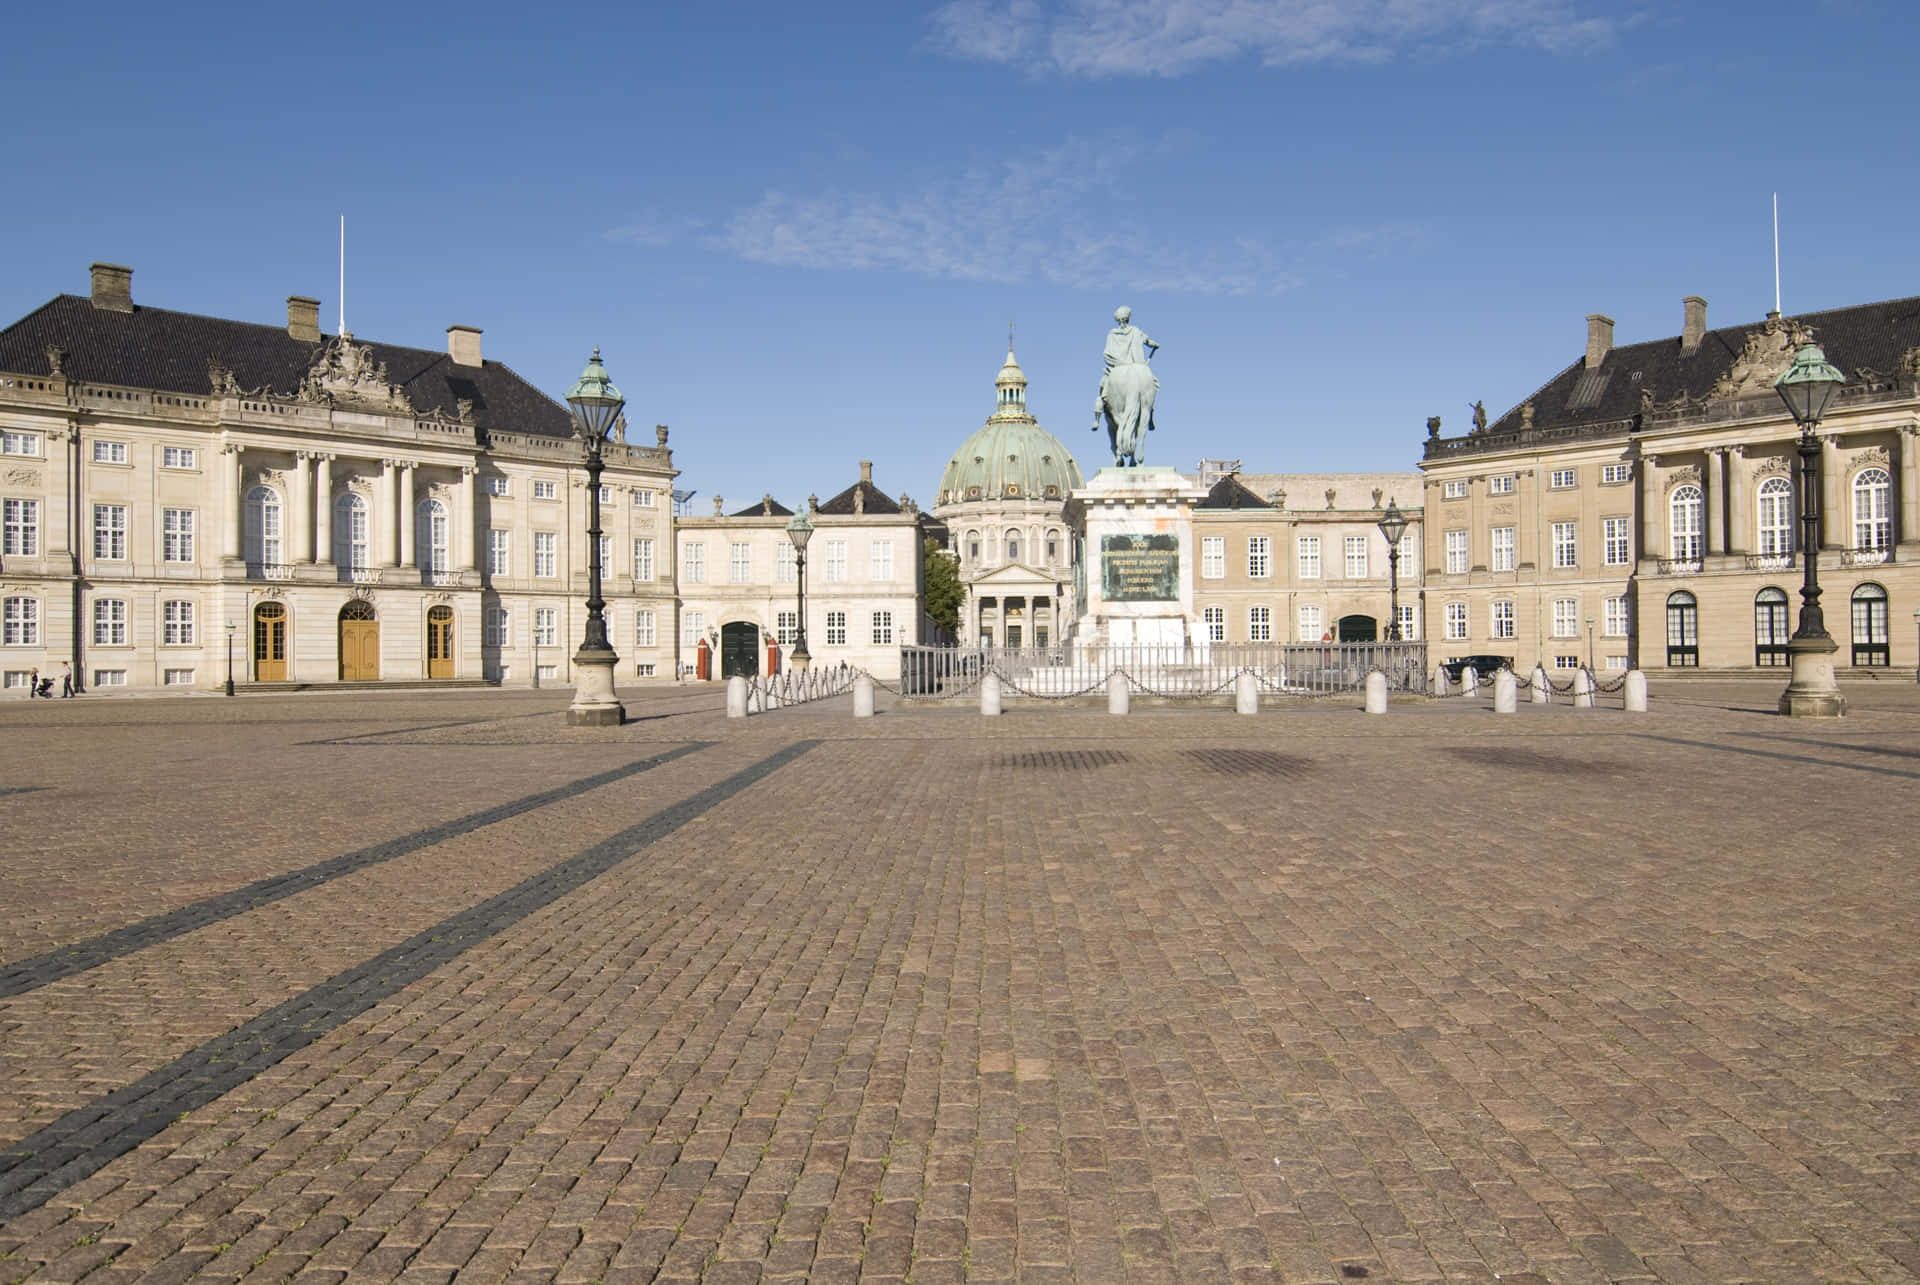 Download Structures In Amalienborg Palace Wallpaper | Wallpapers.com